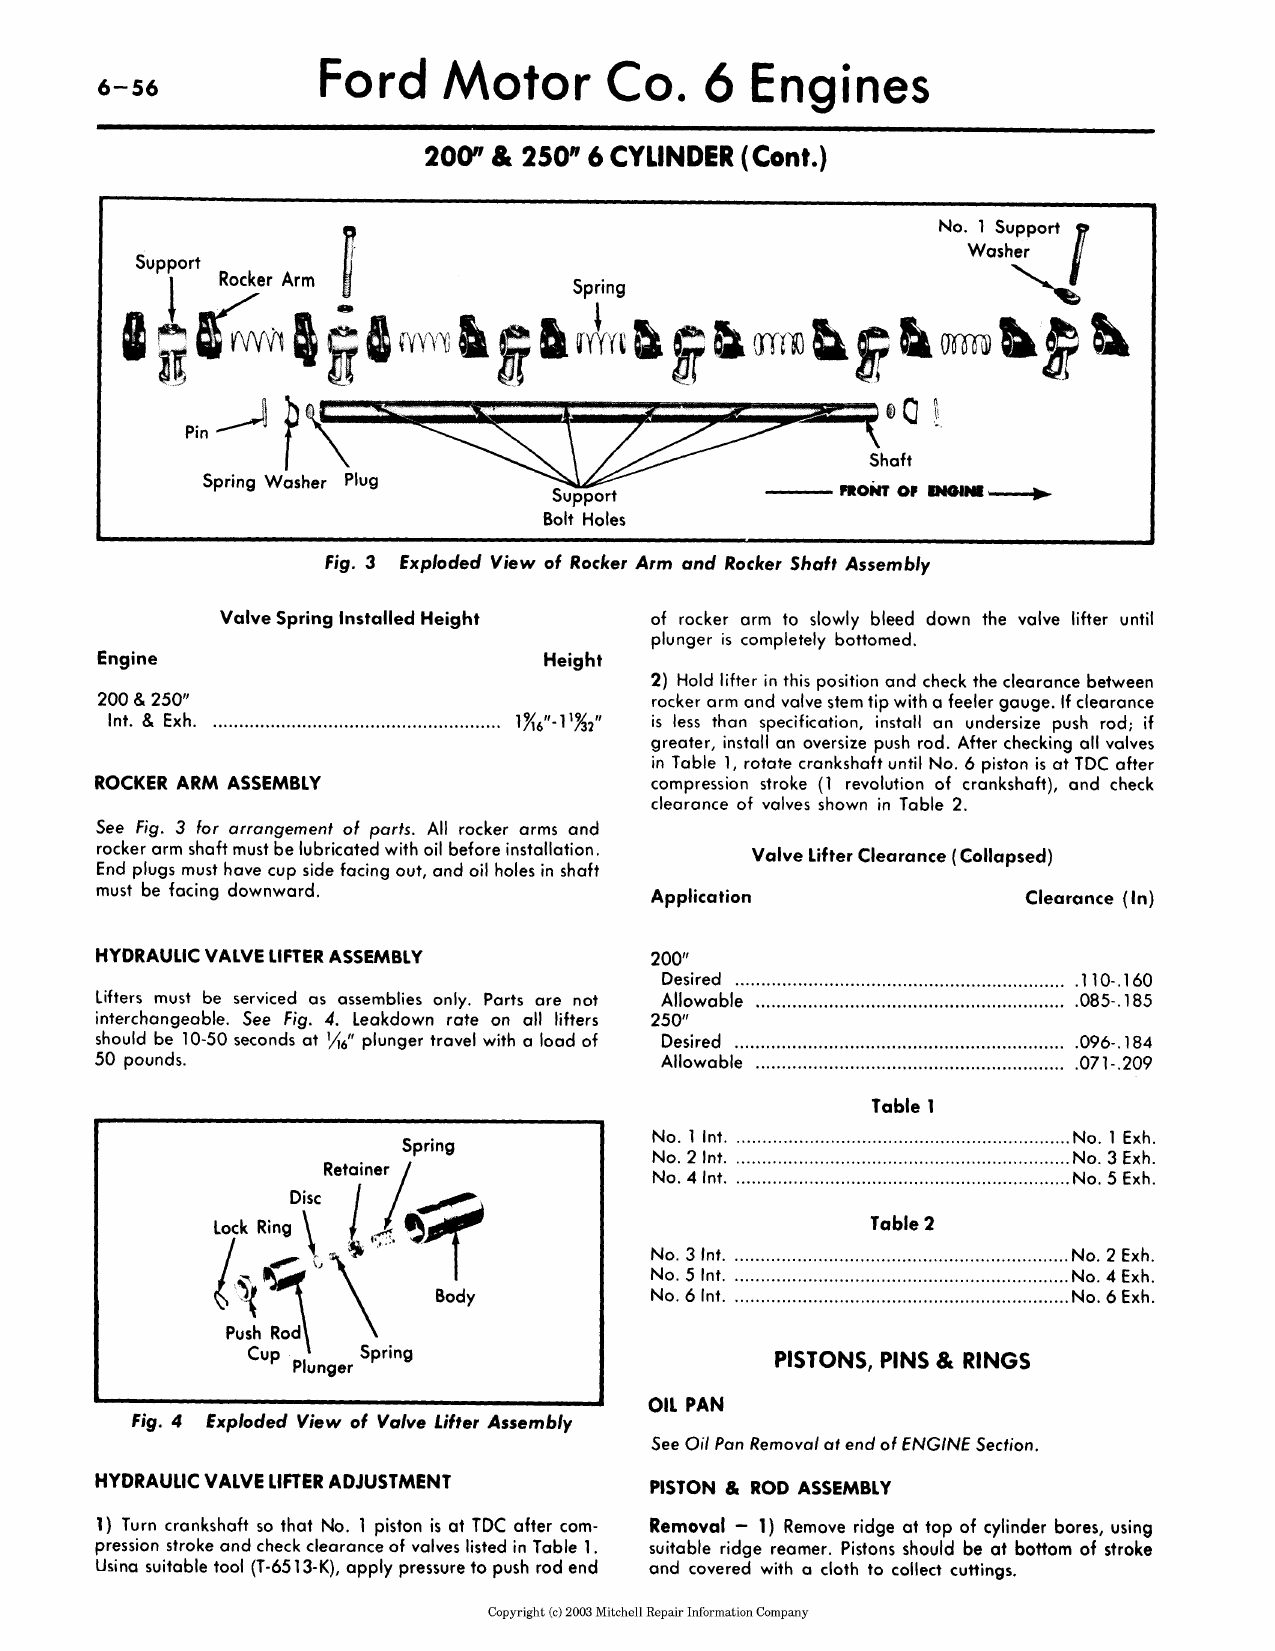 1979-1992 Ford Mustang shop manual Preview image 2